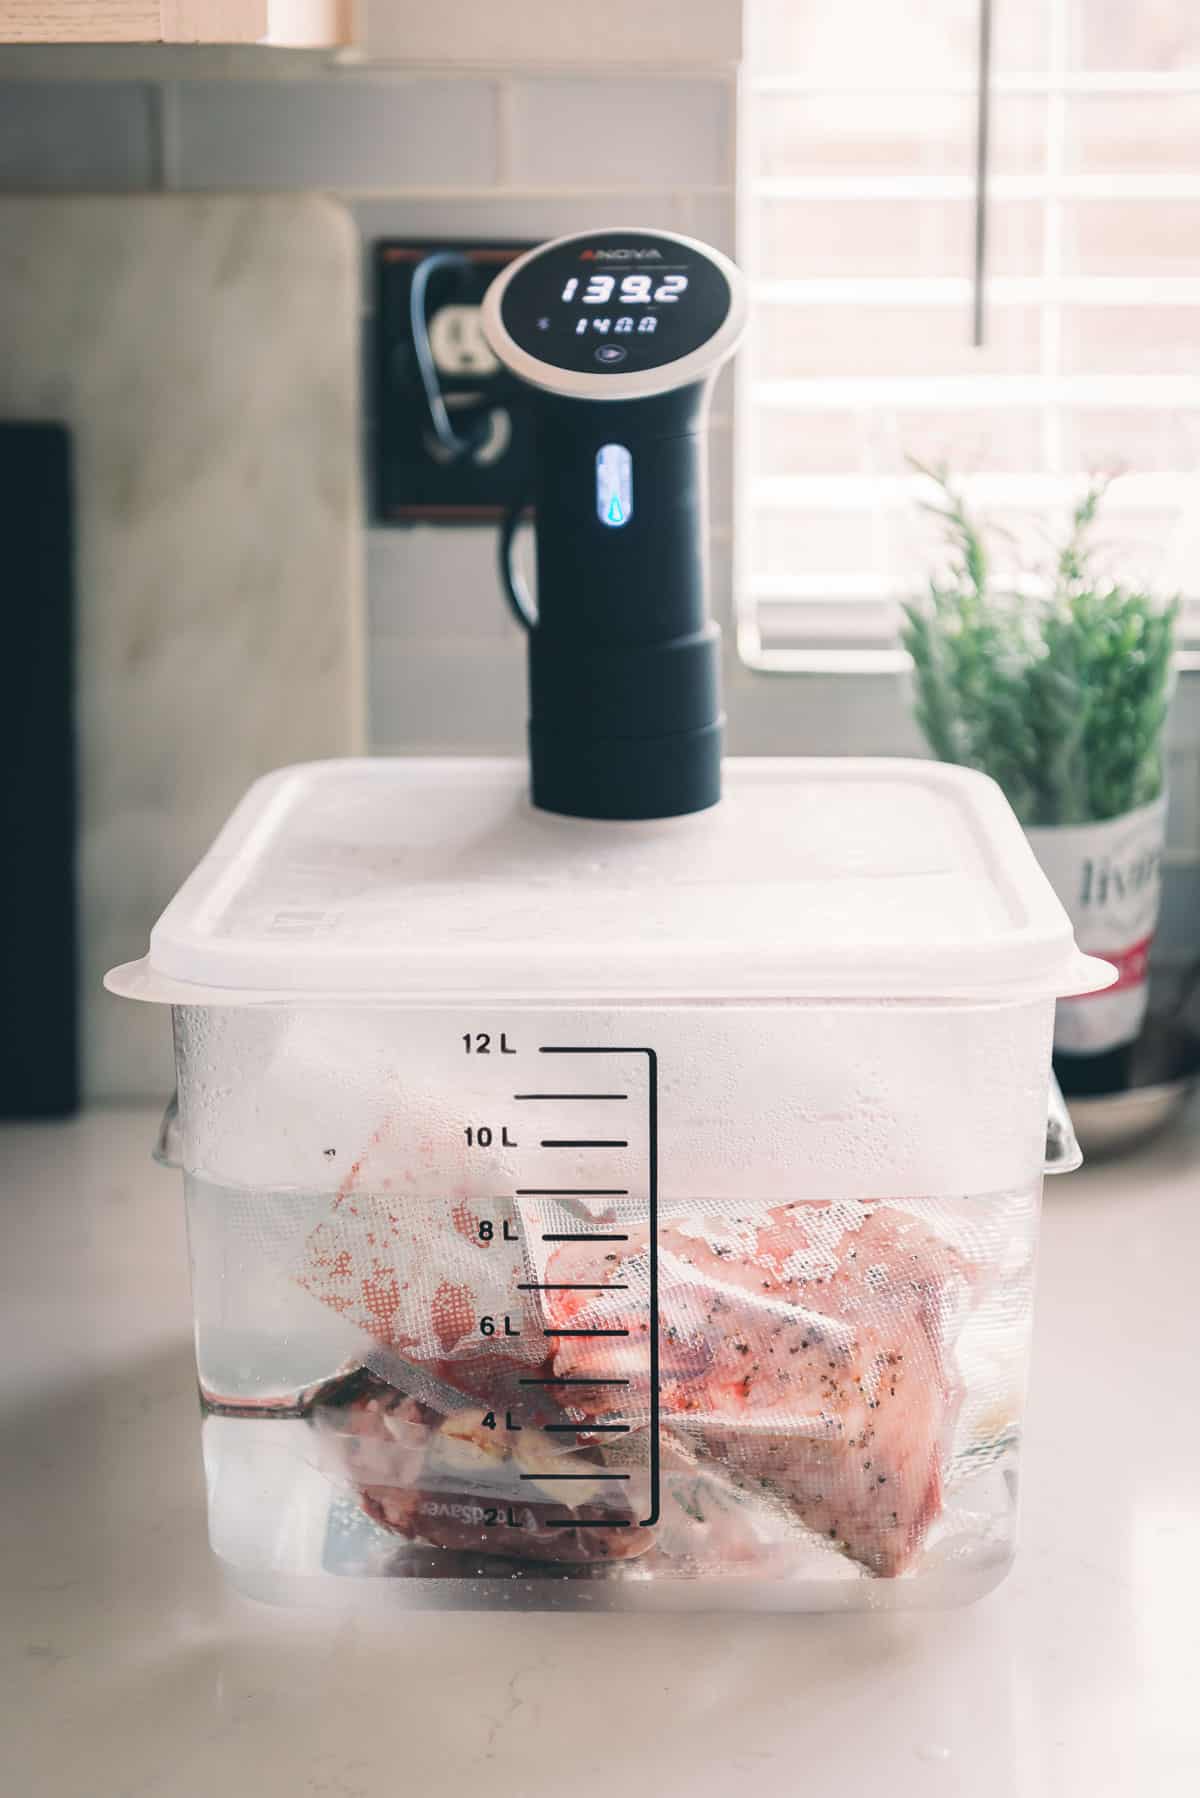 Sous vide machine with lamb shanks submerged in a water bath.